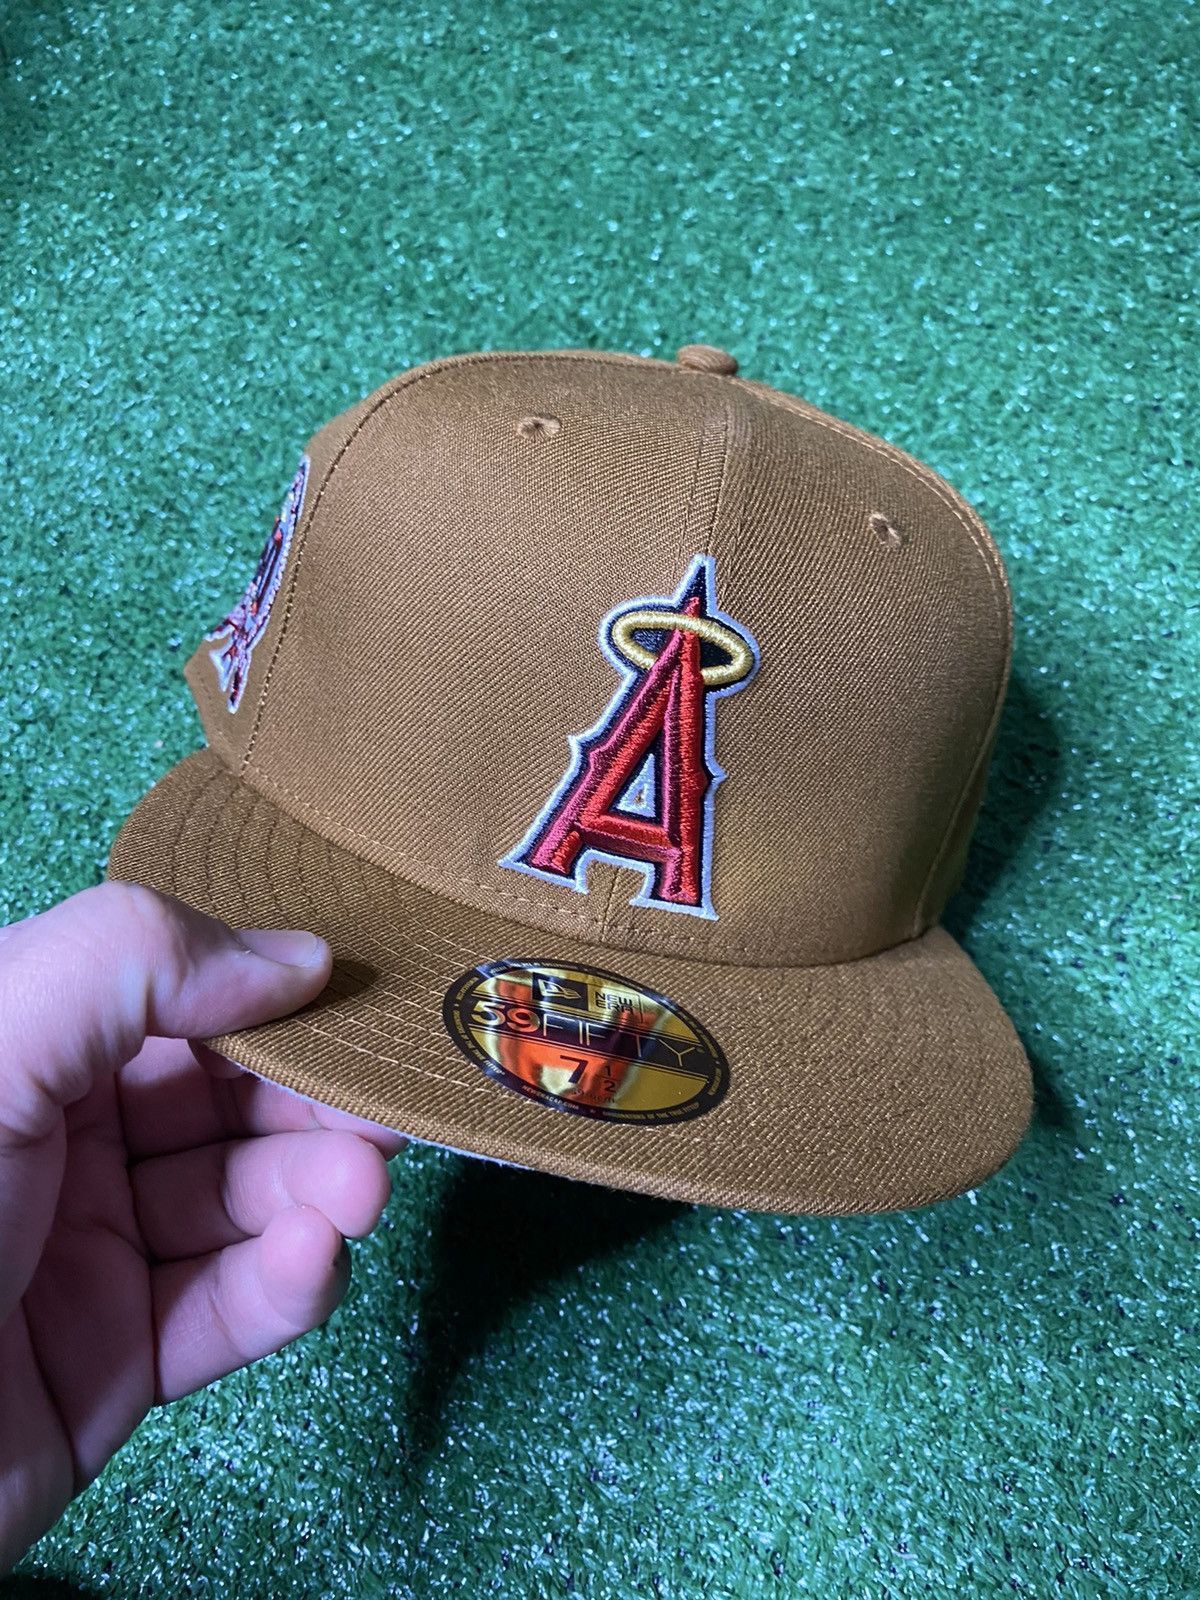 New Era ANGELS NEW ERA BOURBON BROWN HAT 7 1/2 Size ONE SIZE - 1 Preview